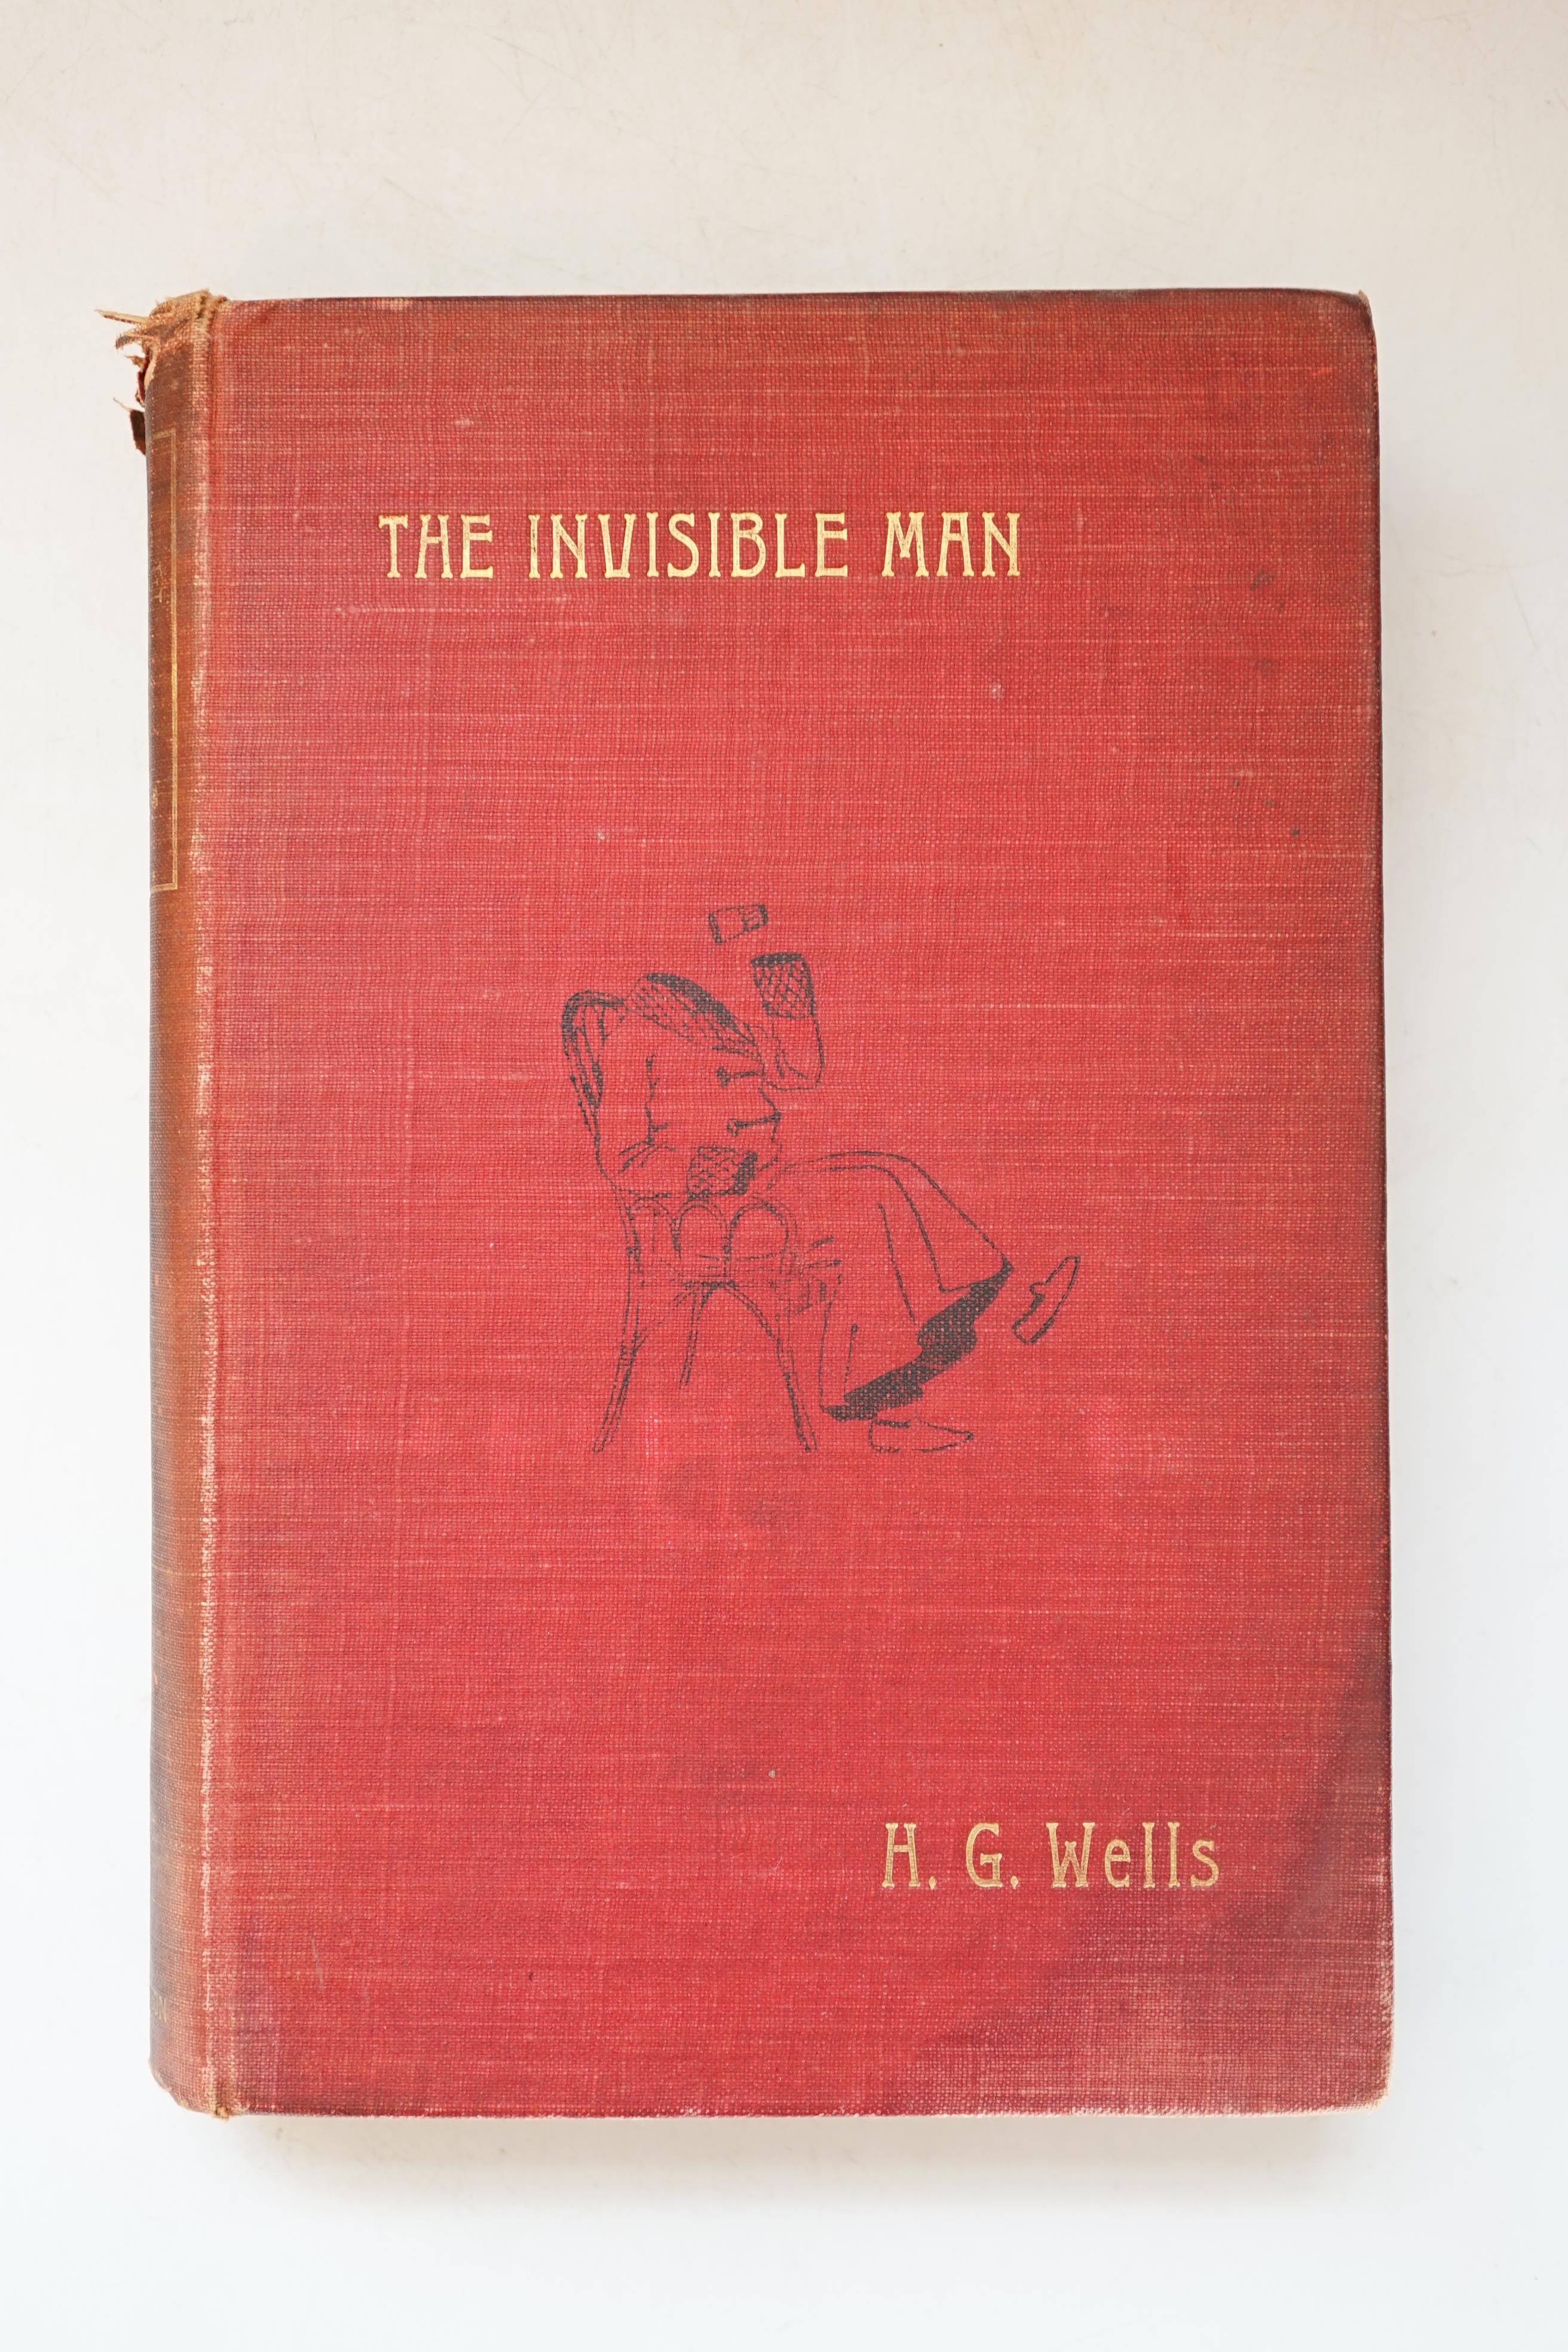 Wells, H. G. (1866-1946). The Invisible Man. A Grotesque Romance, 8vo, half title, title printed in orange and black, 2-pages of publisher's advertisements at the end, original red pictorial cloth lettered in gilt, light